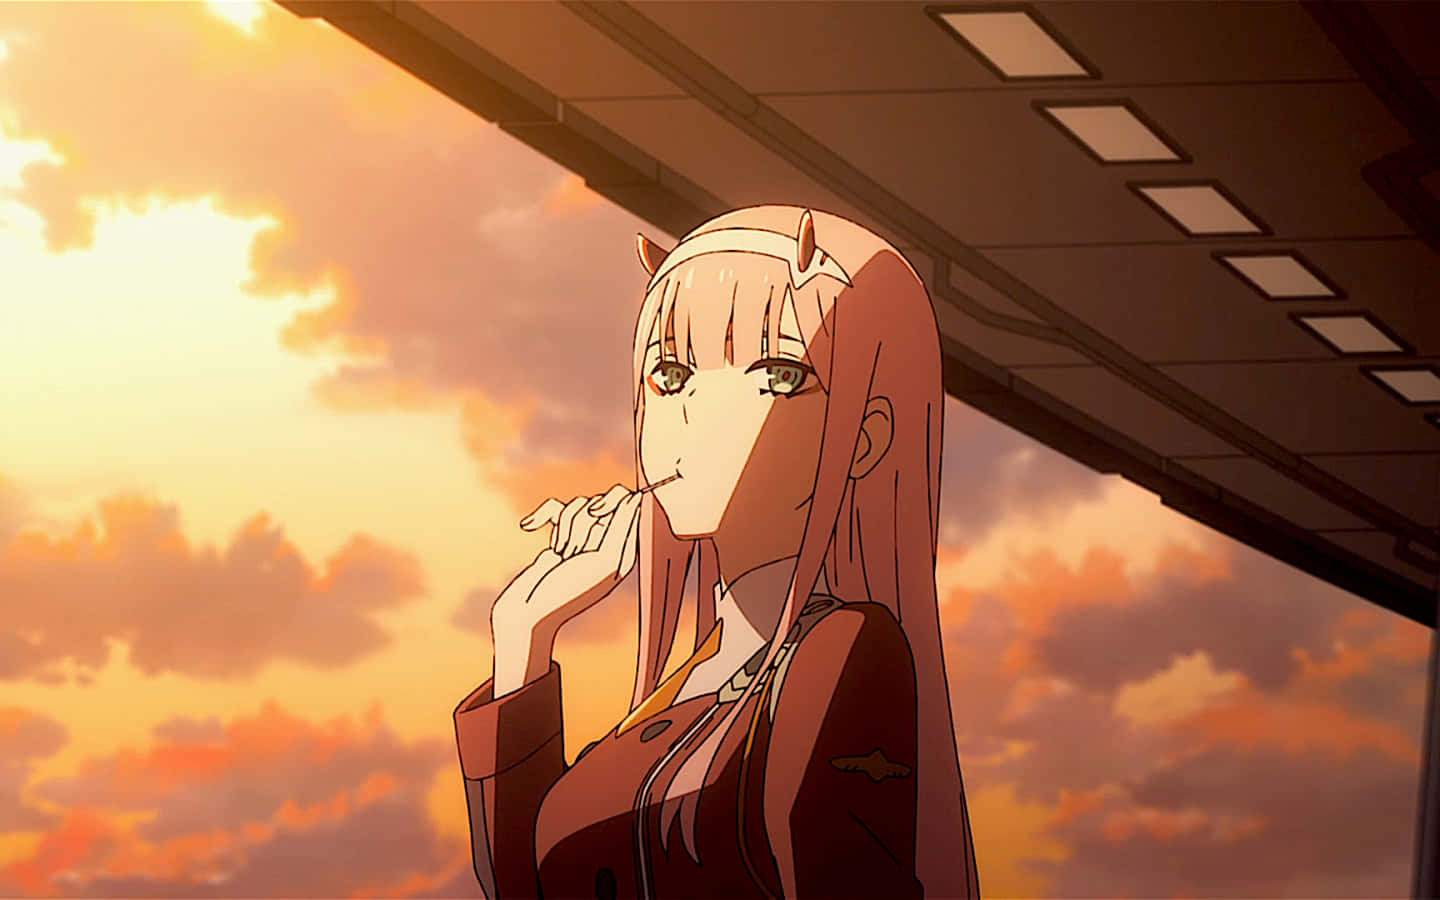 Two pilots explore a brave new world together in Darling In The Franxx.